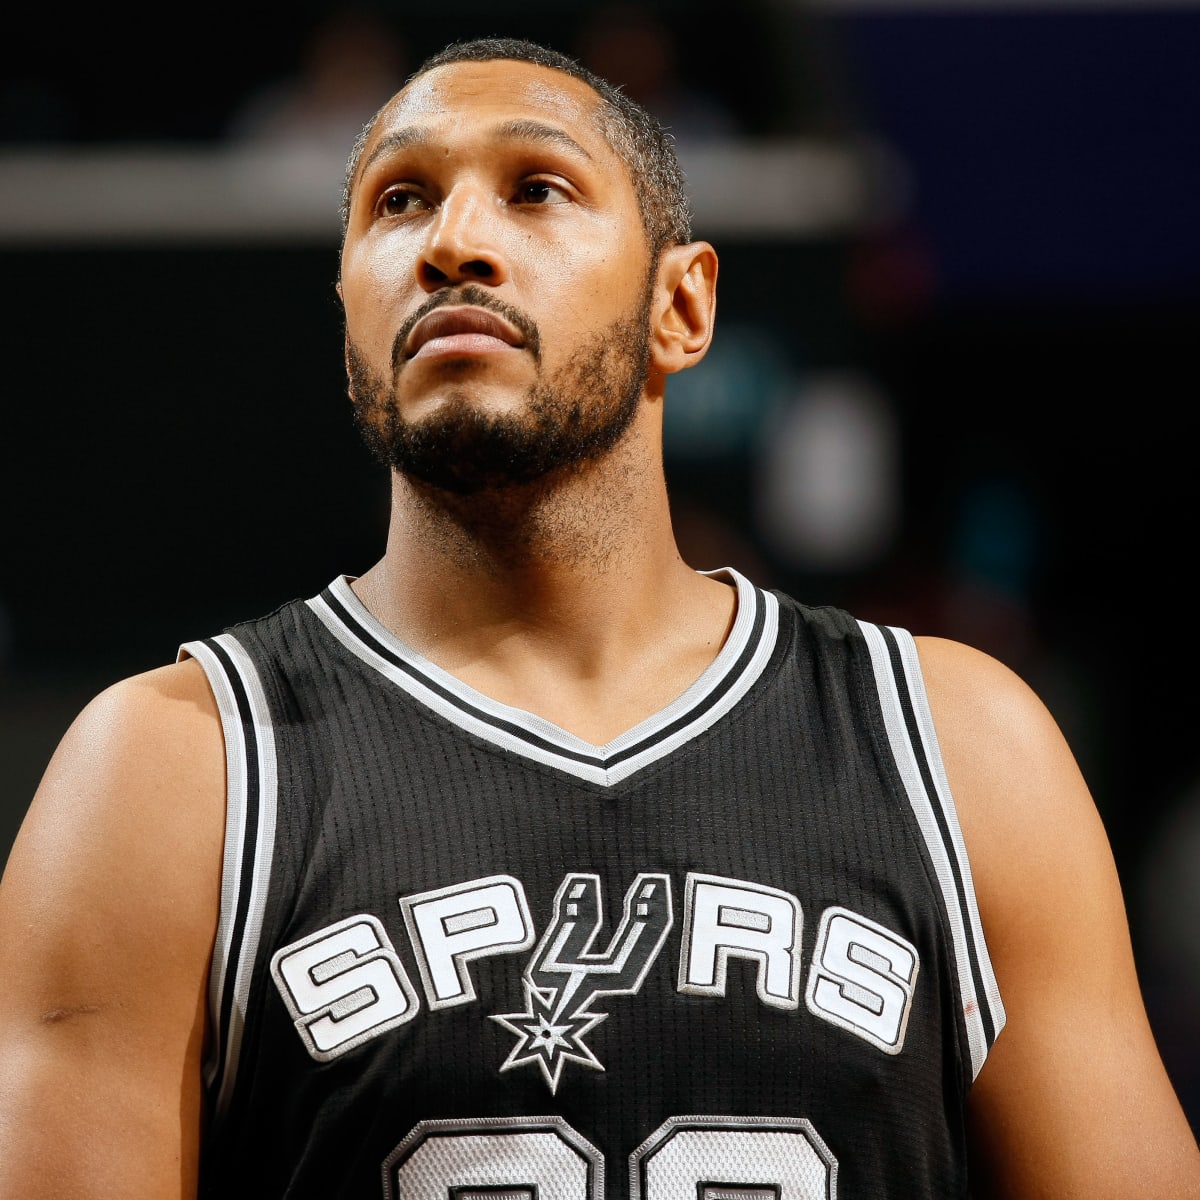 Boris Diaw signs three-year deal with Spurs